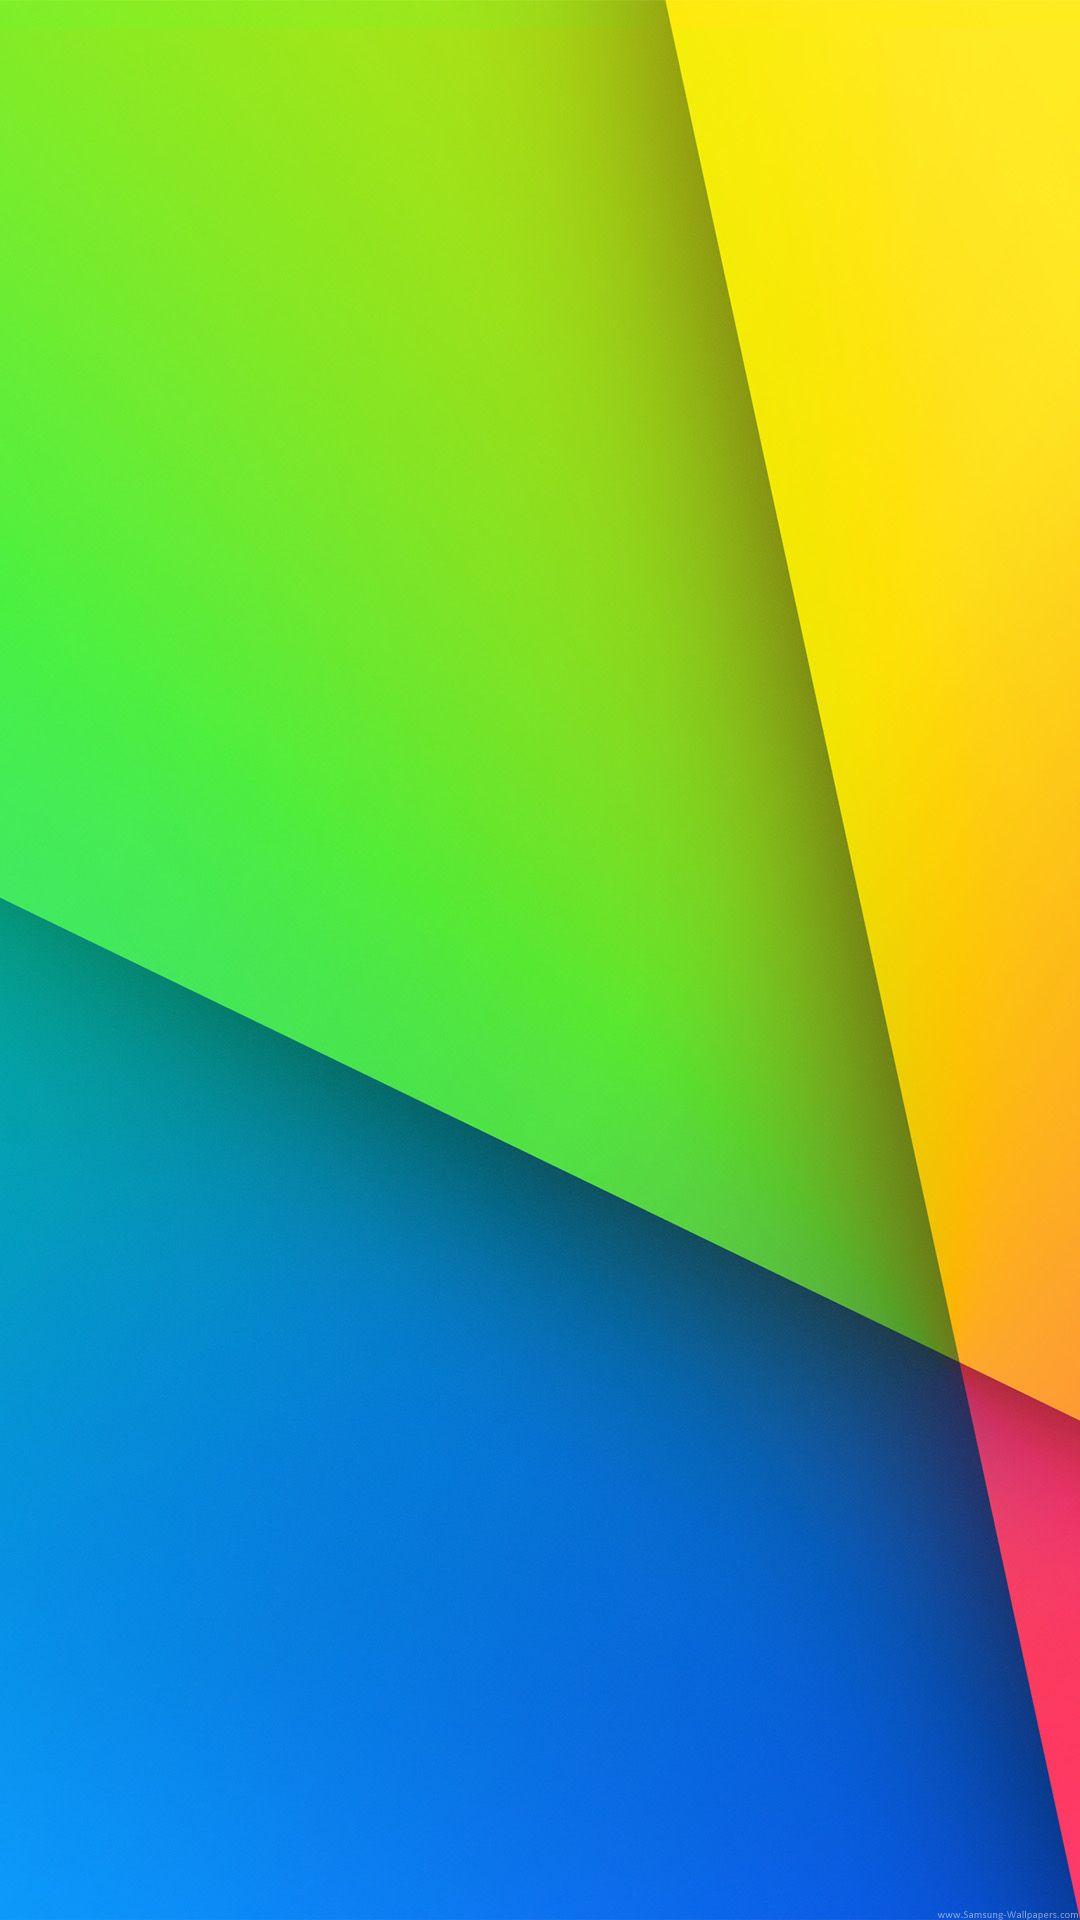 Nexus 7 Official Wallpaper for 1080x1920 HTC. HTC One (M7)